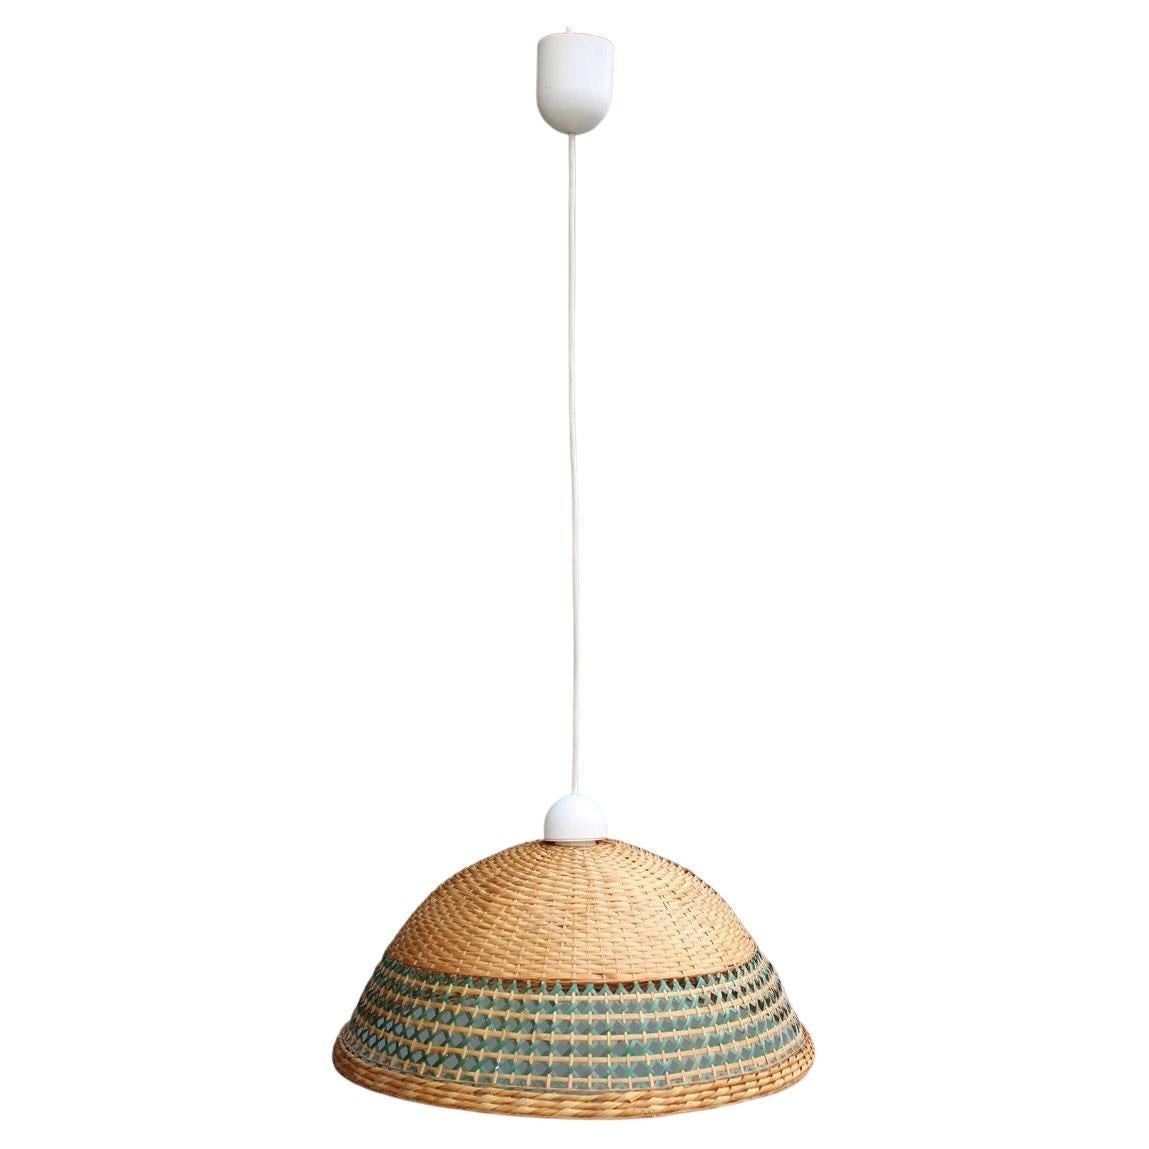 Sardinian Dome Chandelier Hand-Woven Straw Green Color Midcentuy Italy Design For Sale